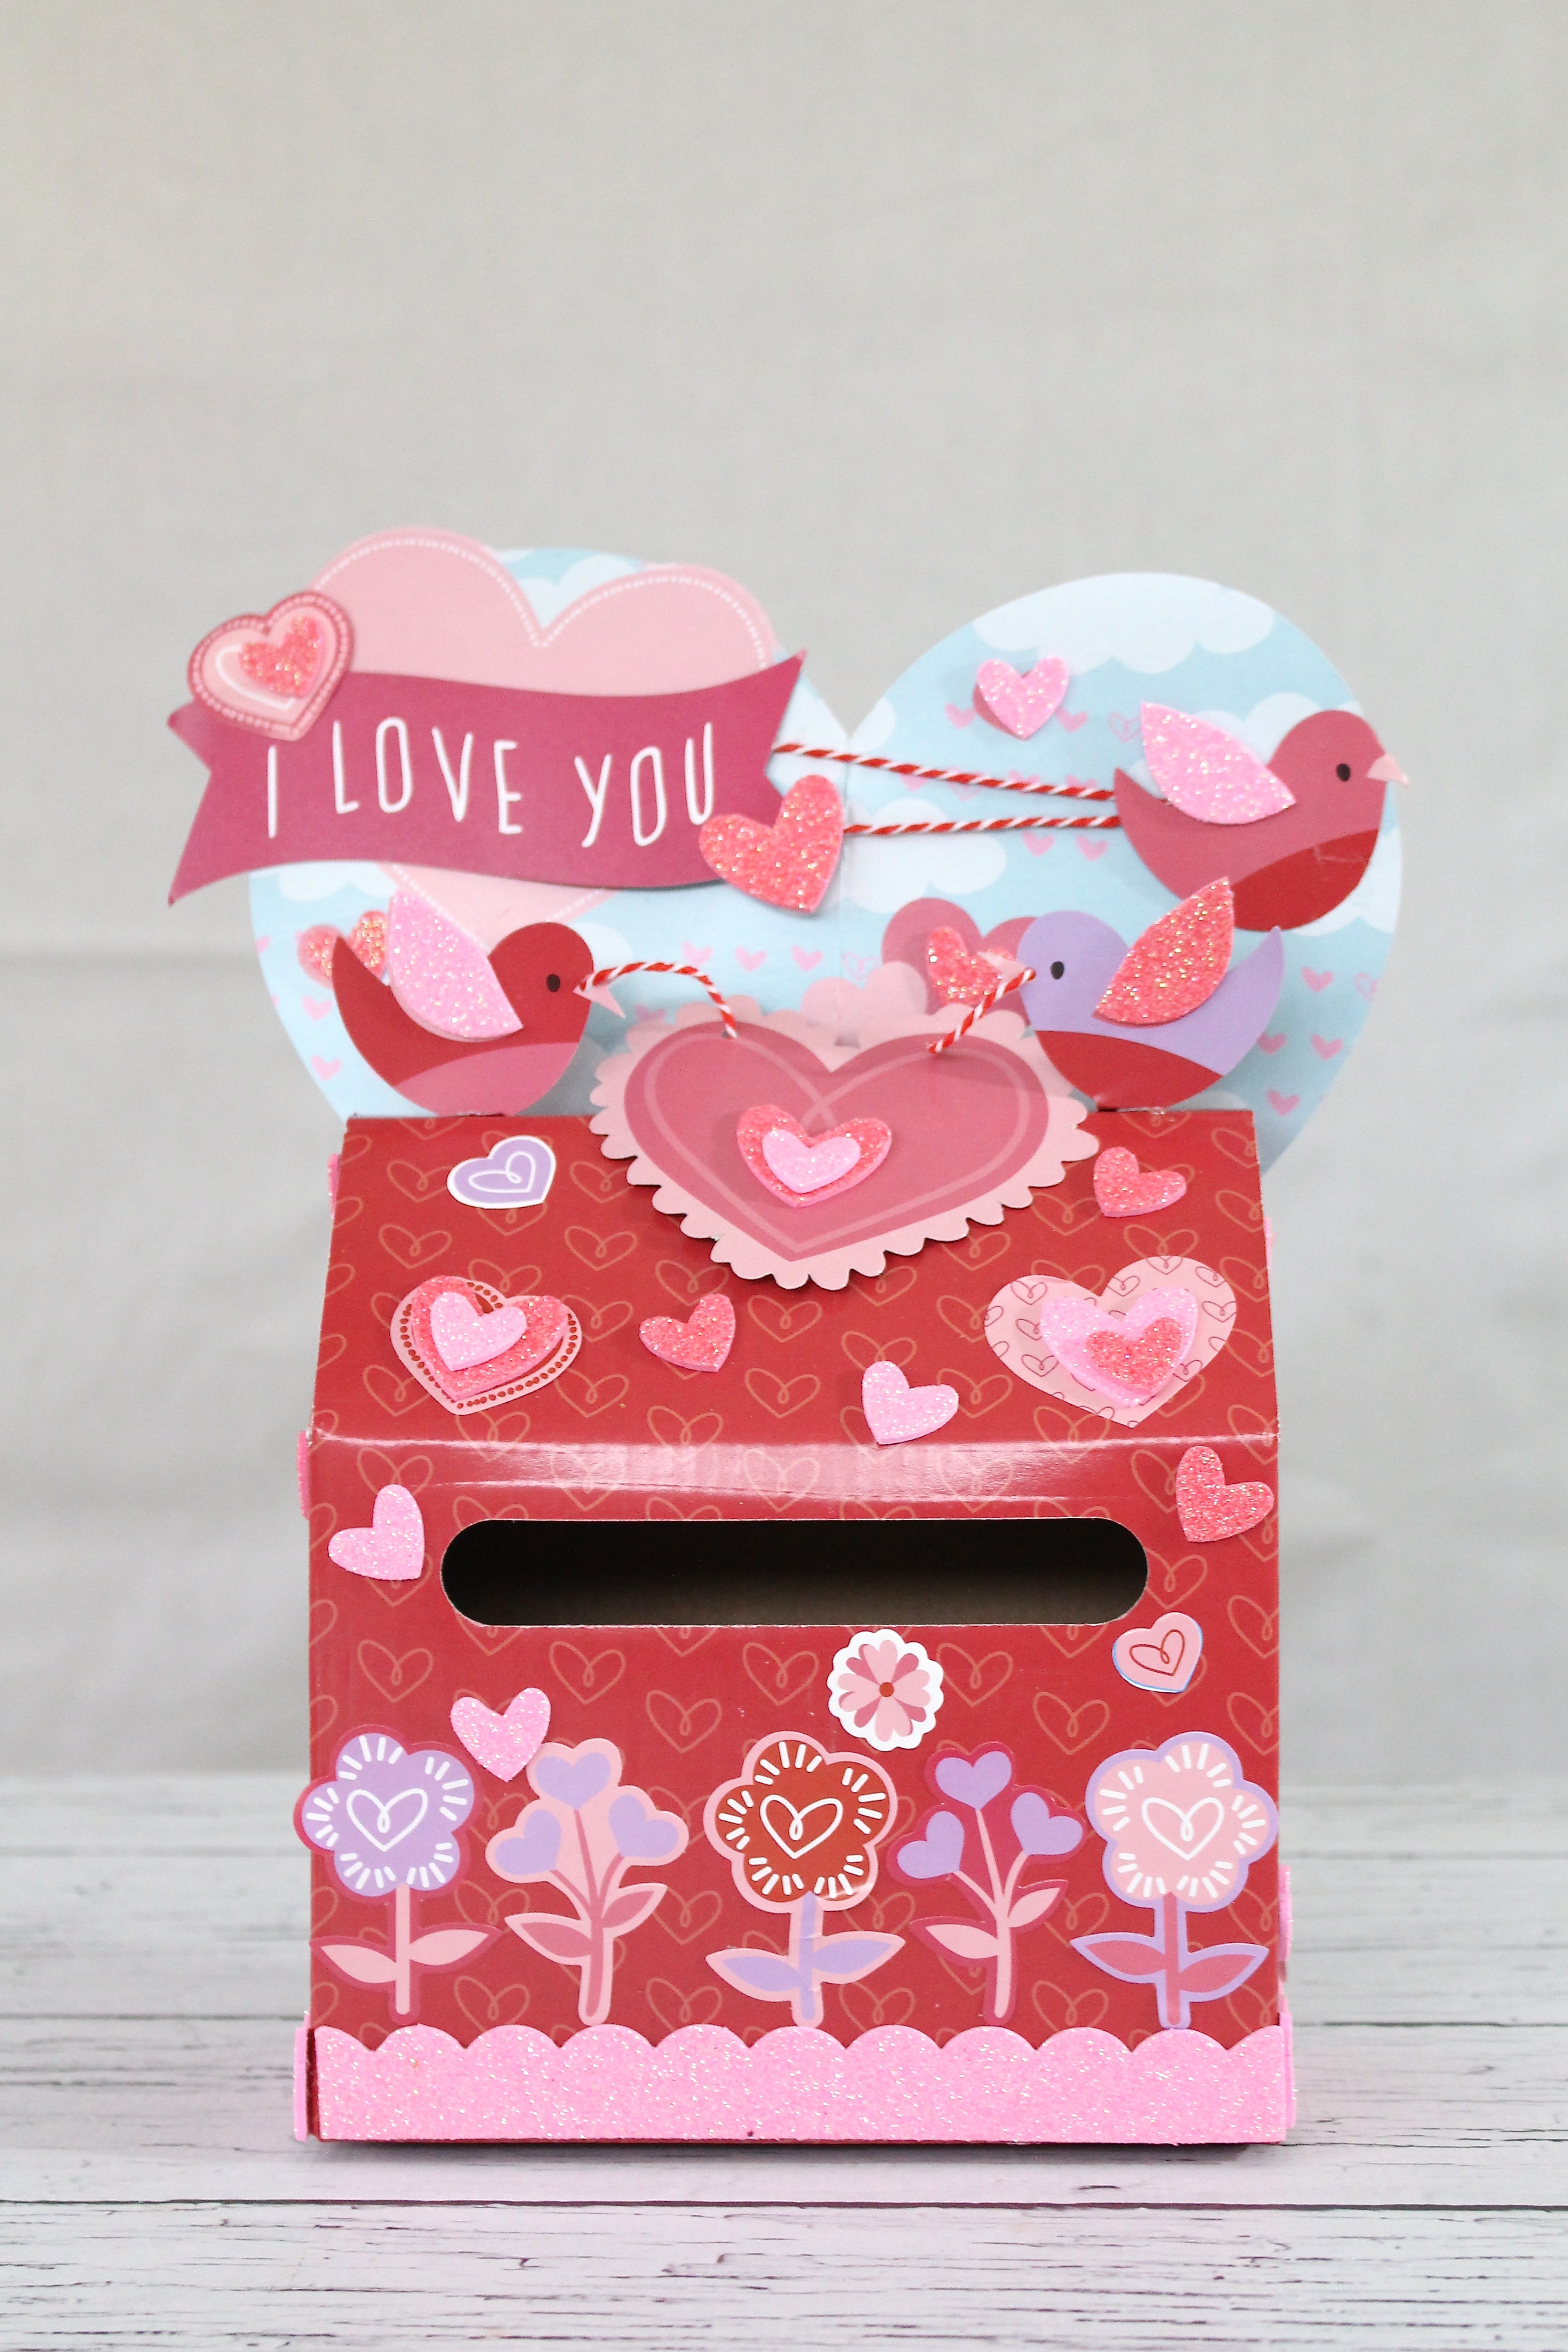 DIY Valentine's Day Ideas for Kids | Yesterday On Tuesday